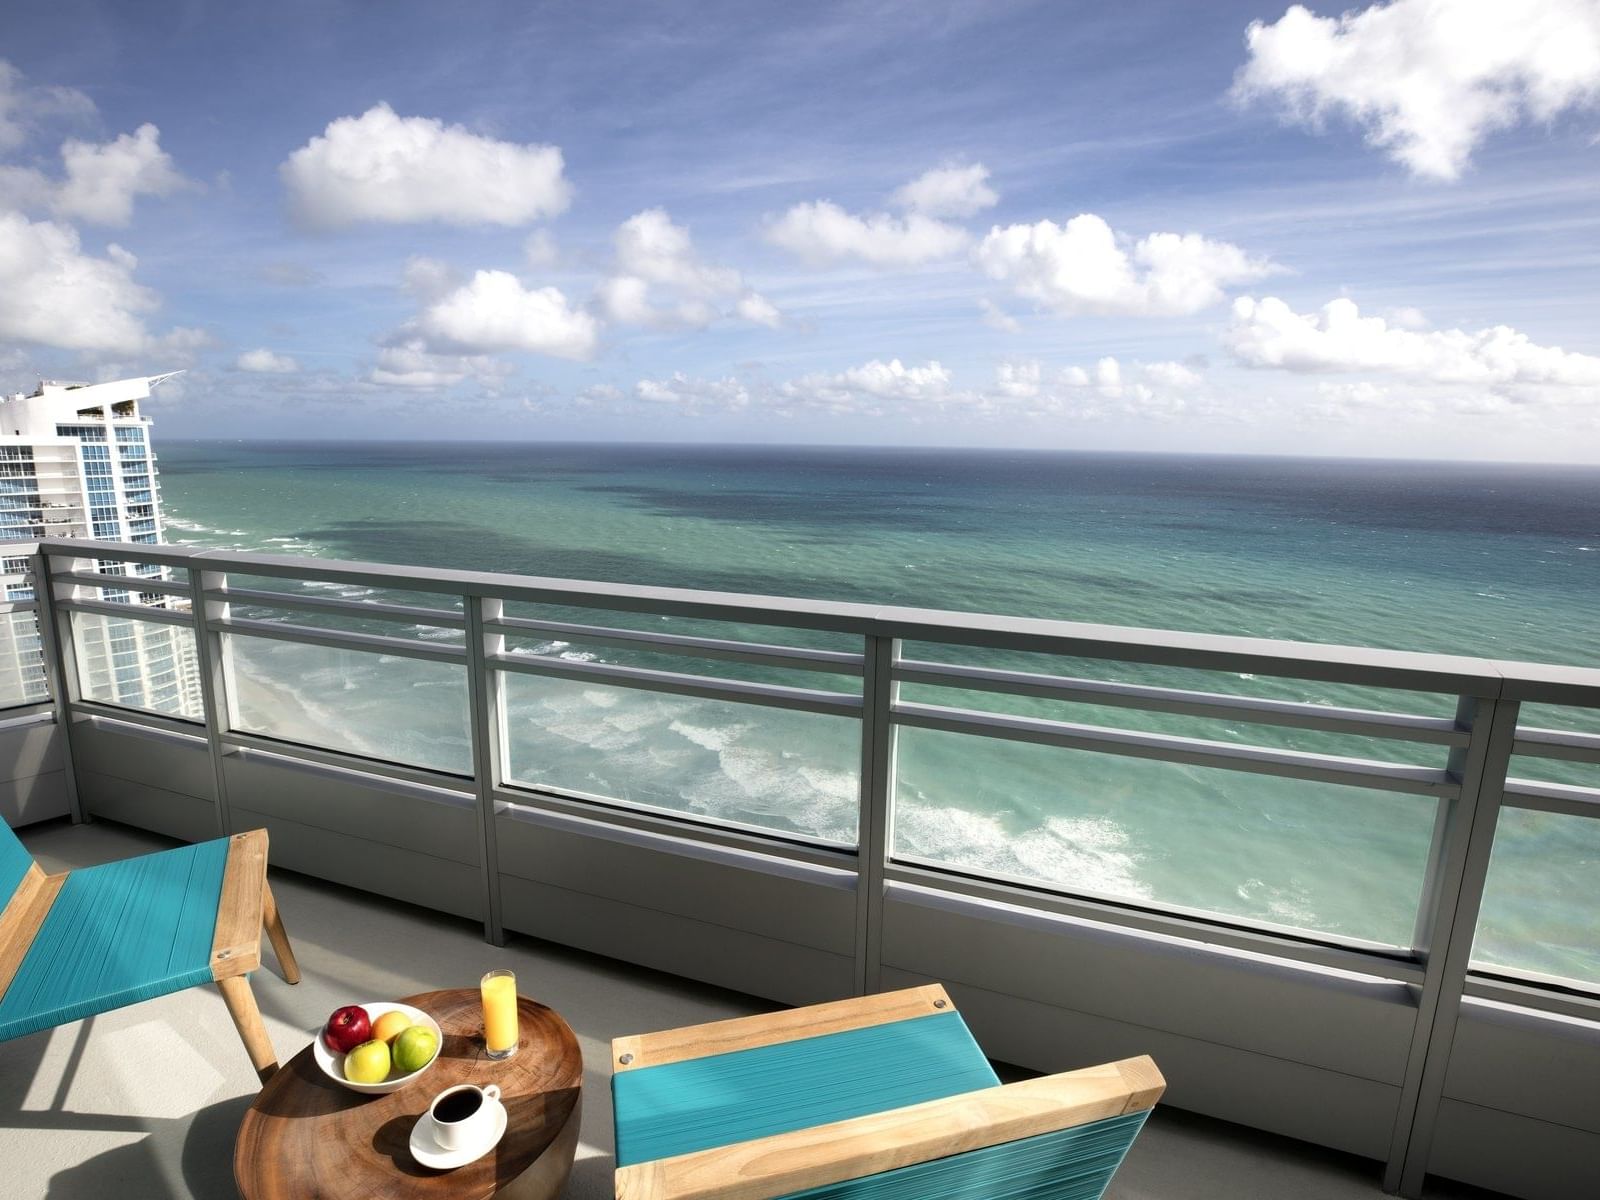 Balcony of the Oceanfront View suite at Diplomat Resort